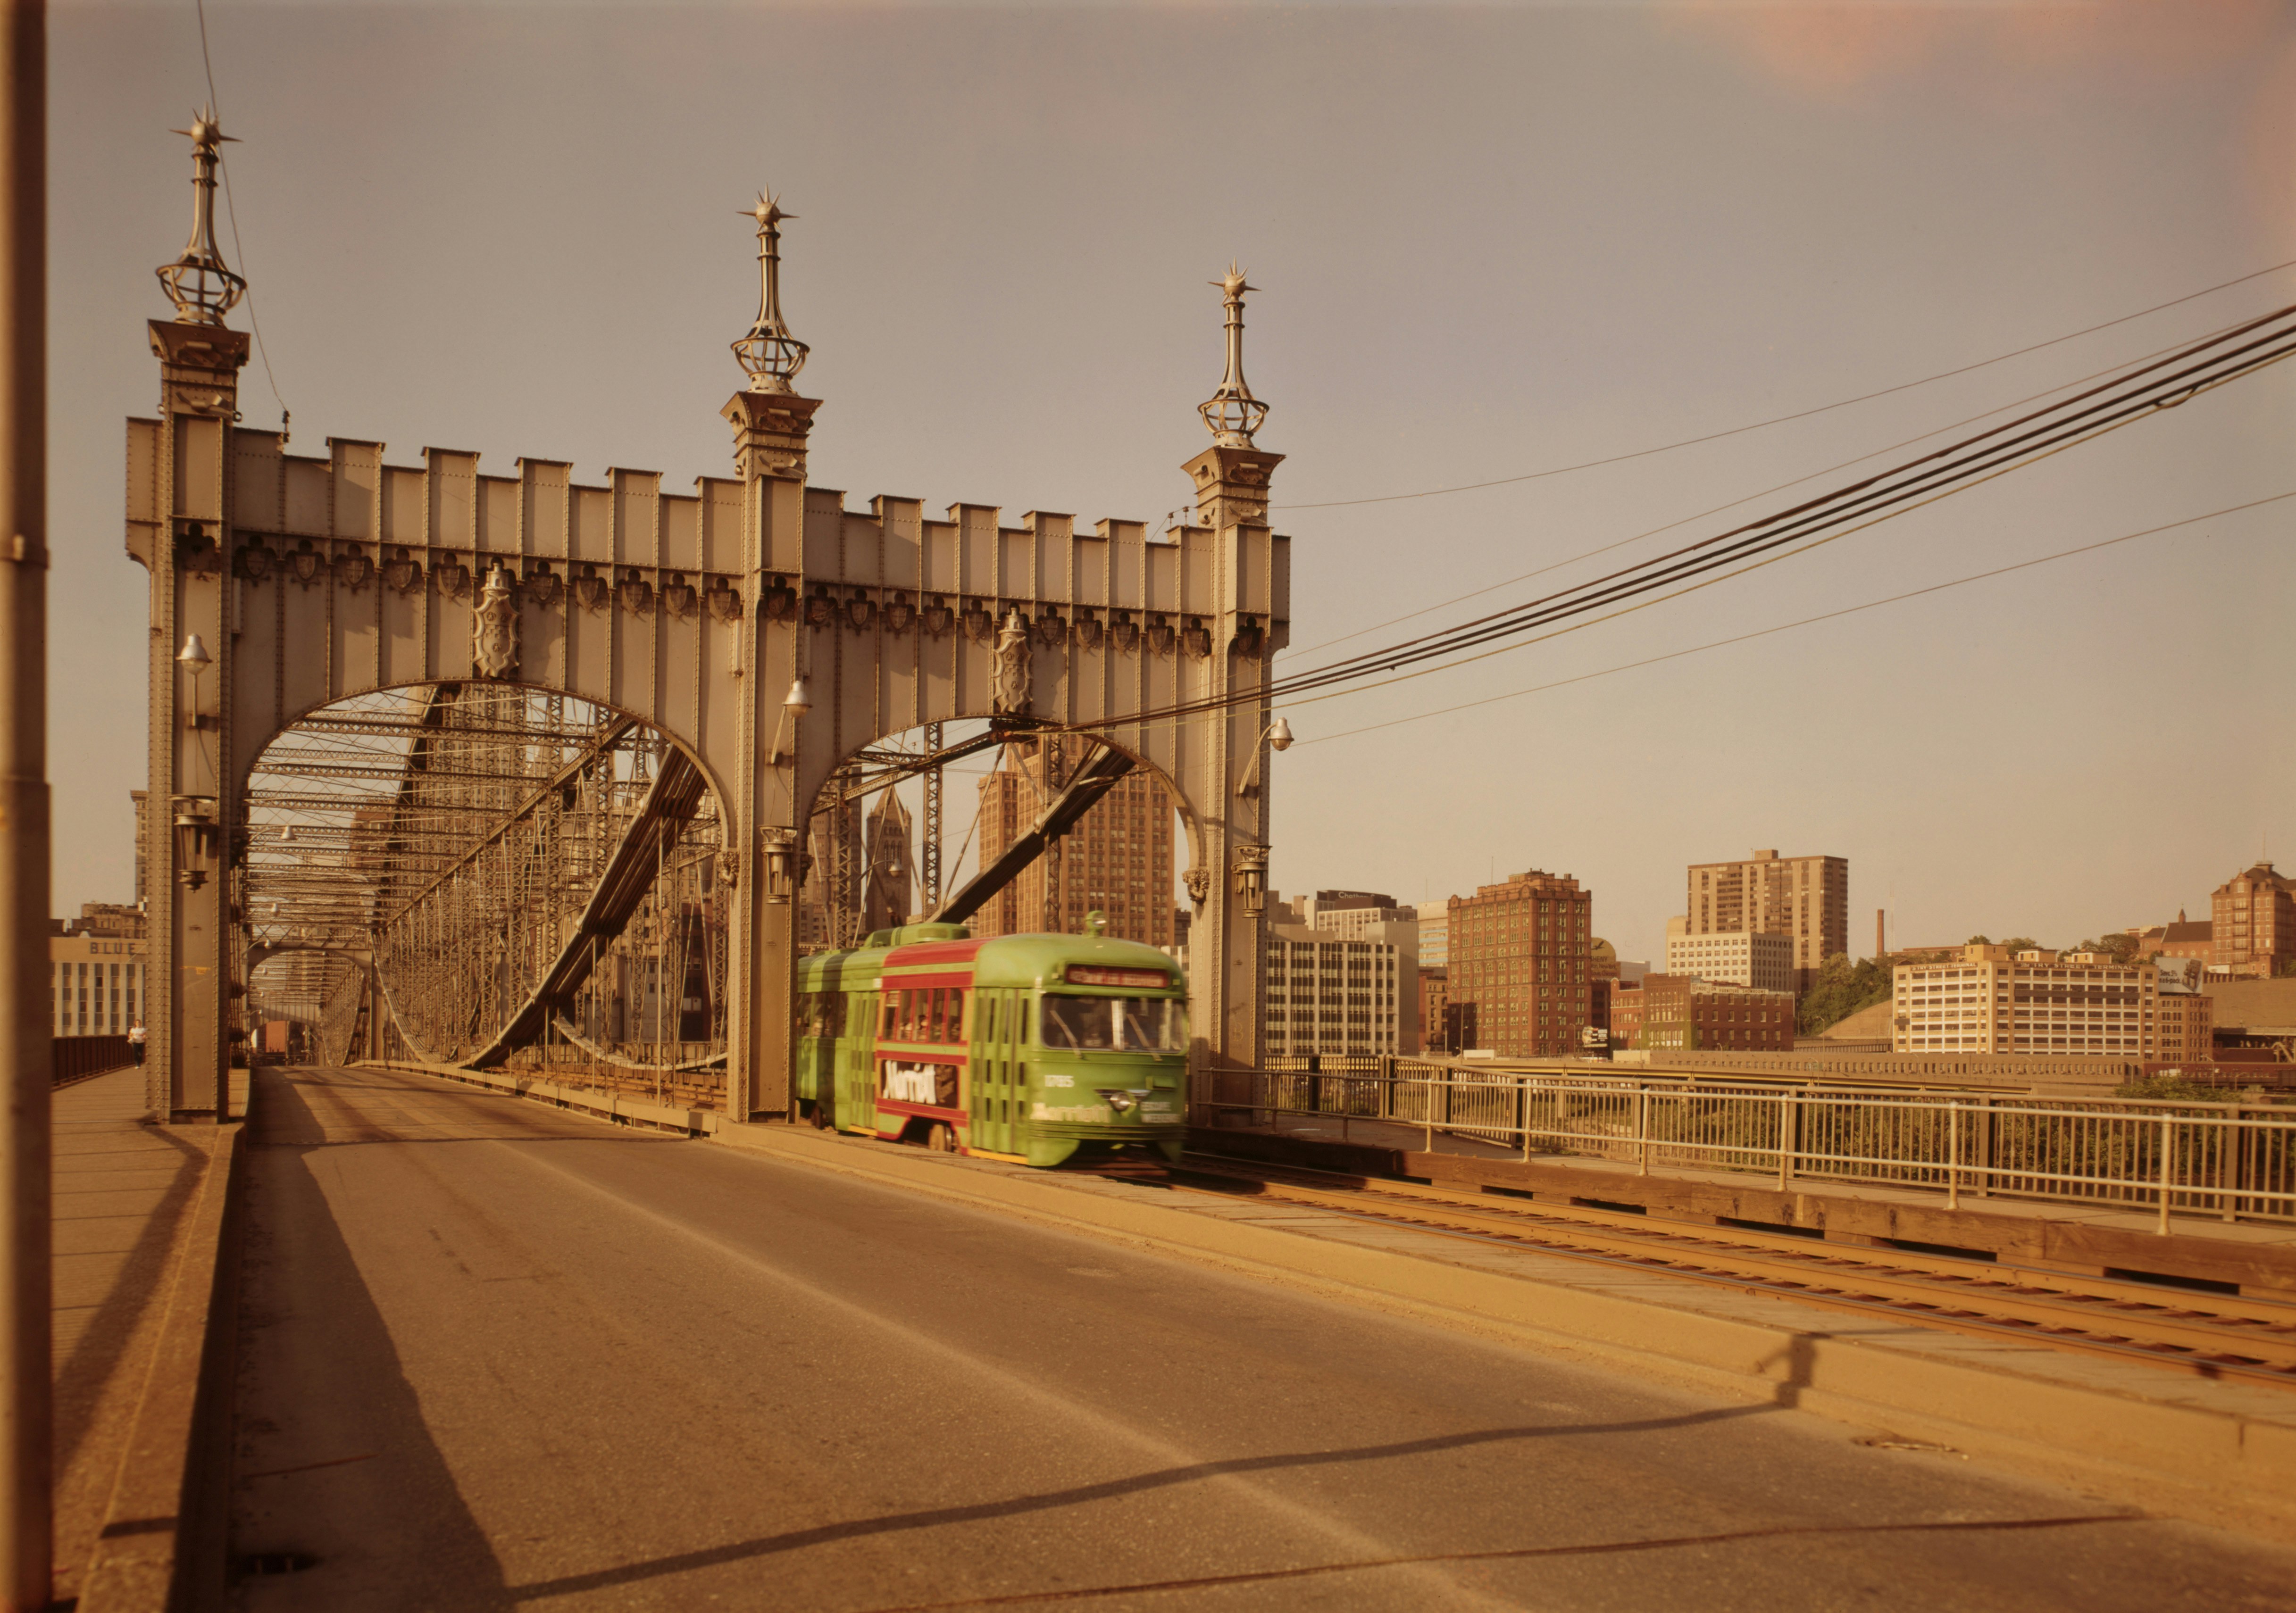 A green, round-faced street car with a red middle section travels across the Smithfield Street Bridge in Pittsburgh in the 1960s. The photo has a warm vintage hue and the bridge is grey steel with ornate crenelations over two arches where the roadway and railway pass.